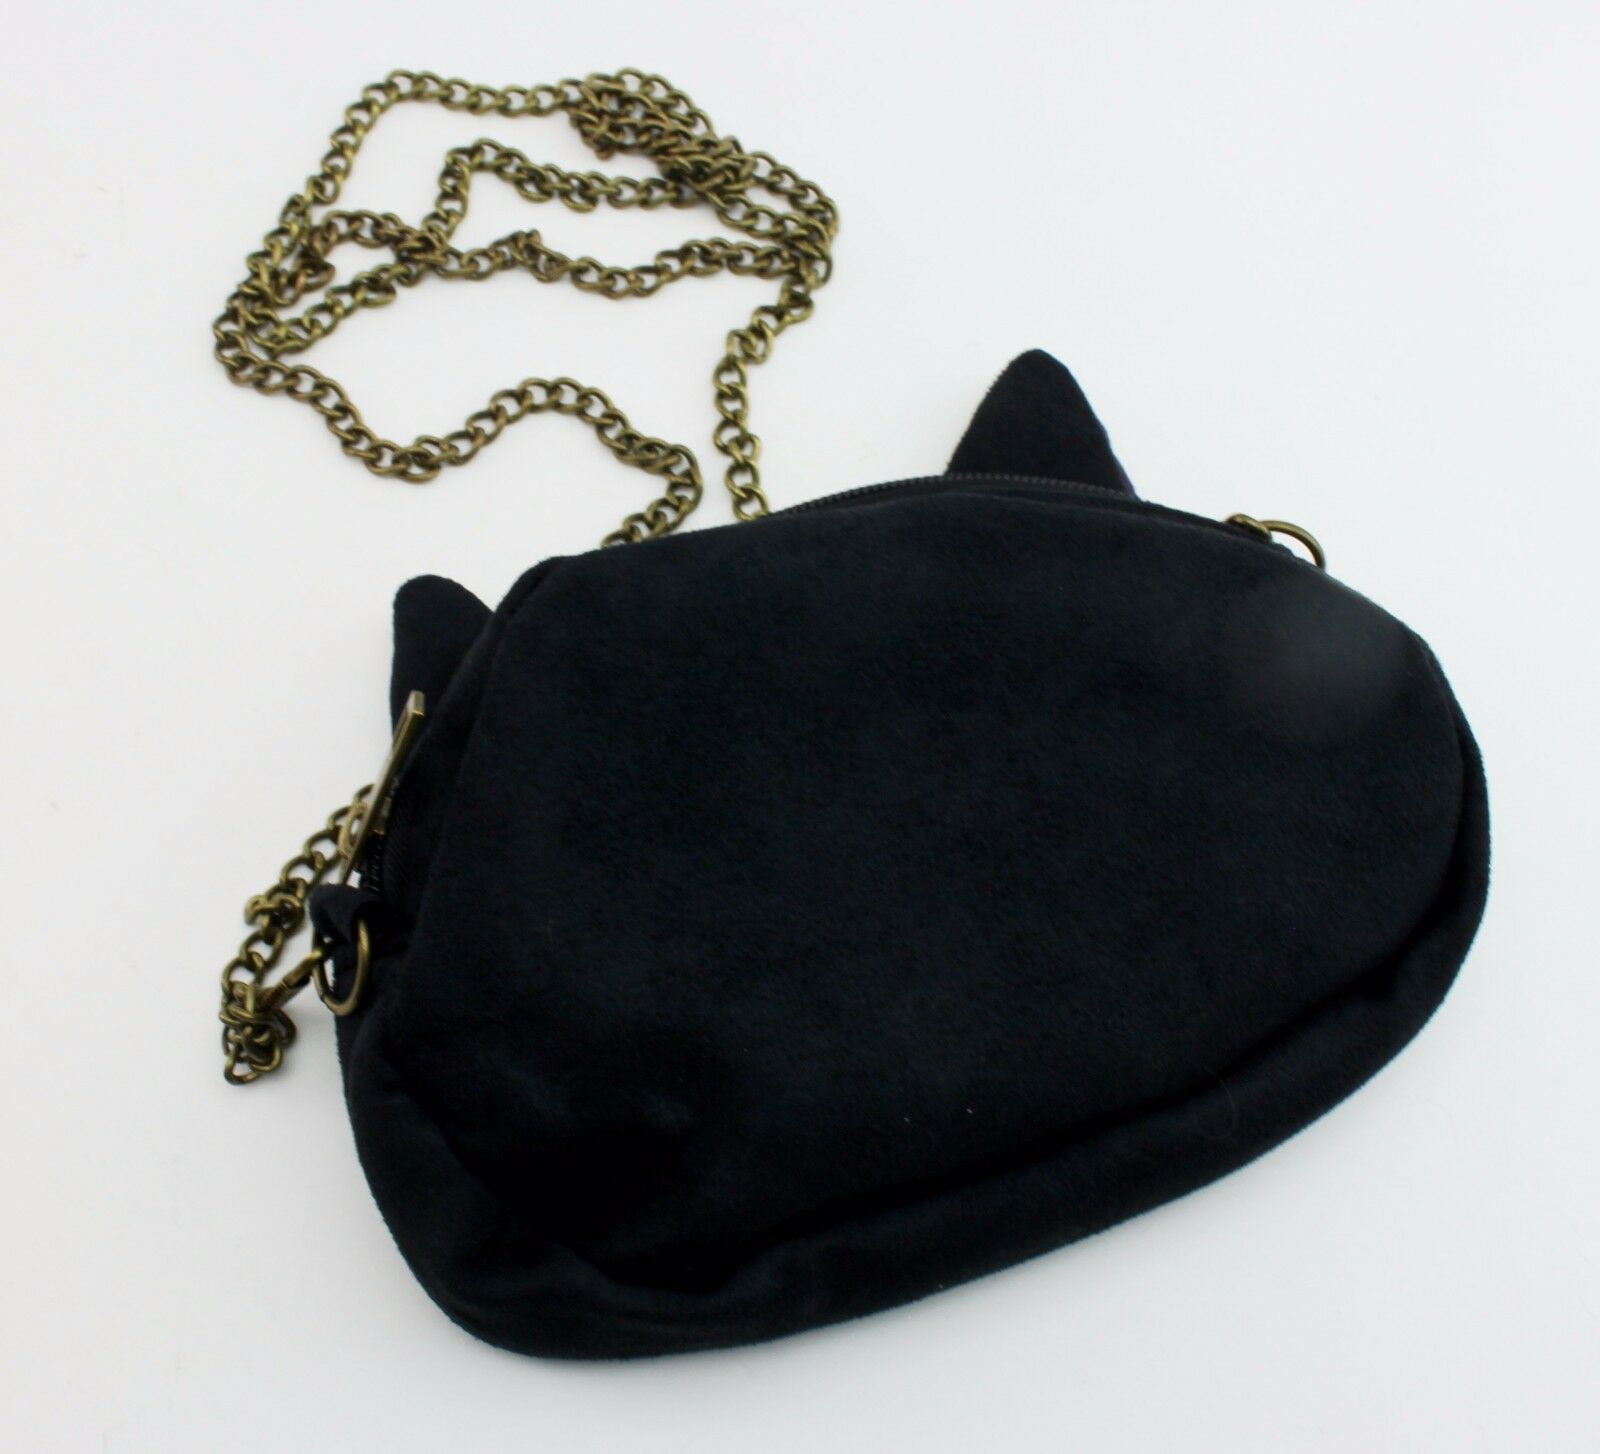 Novelty 3D Print Imitate Cat Face Crossbody Bag Small with Removable Chain Strap 